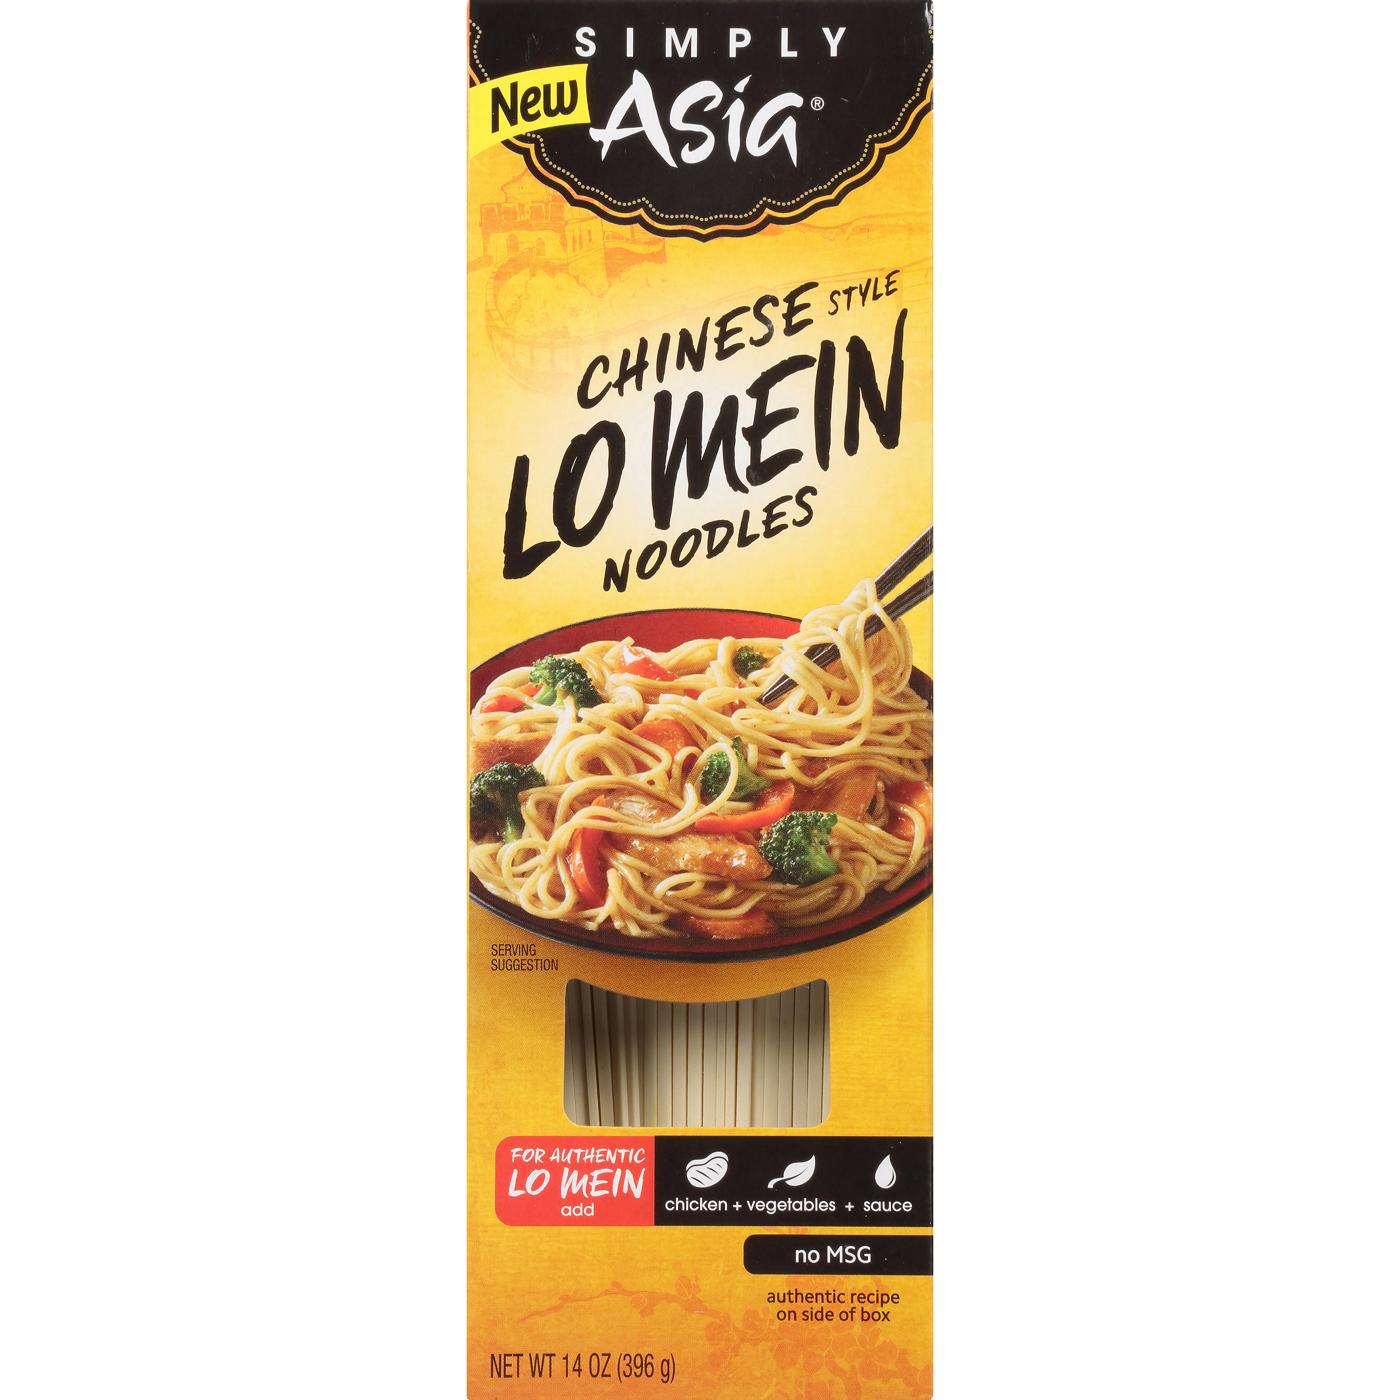 Simply Asia Chinese Style Lo Mein Noodles; image 1 of 8